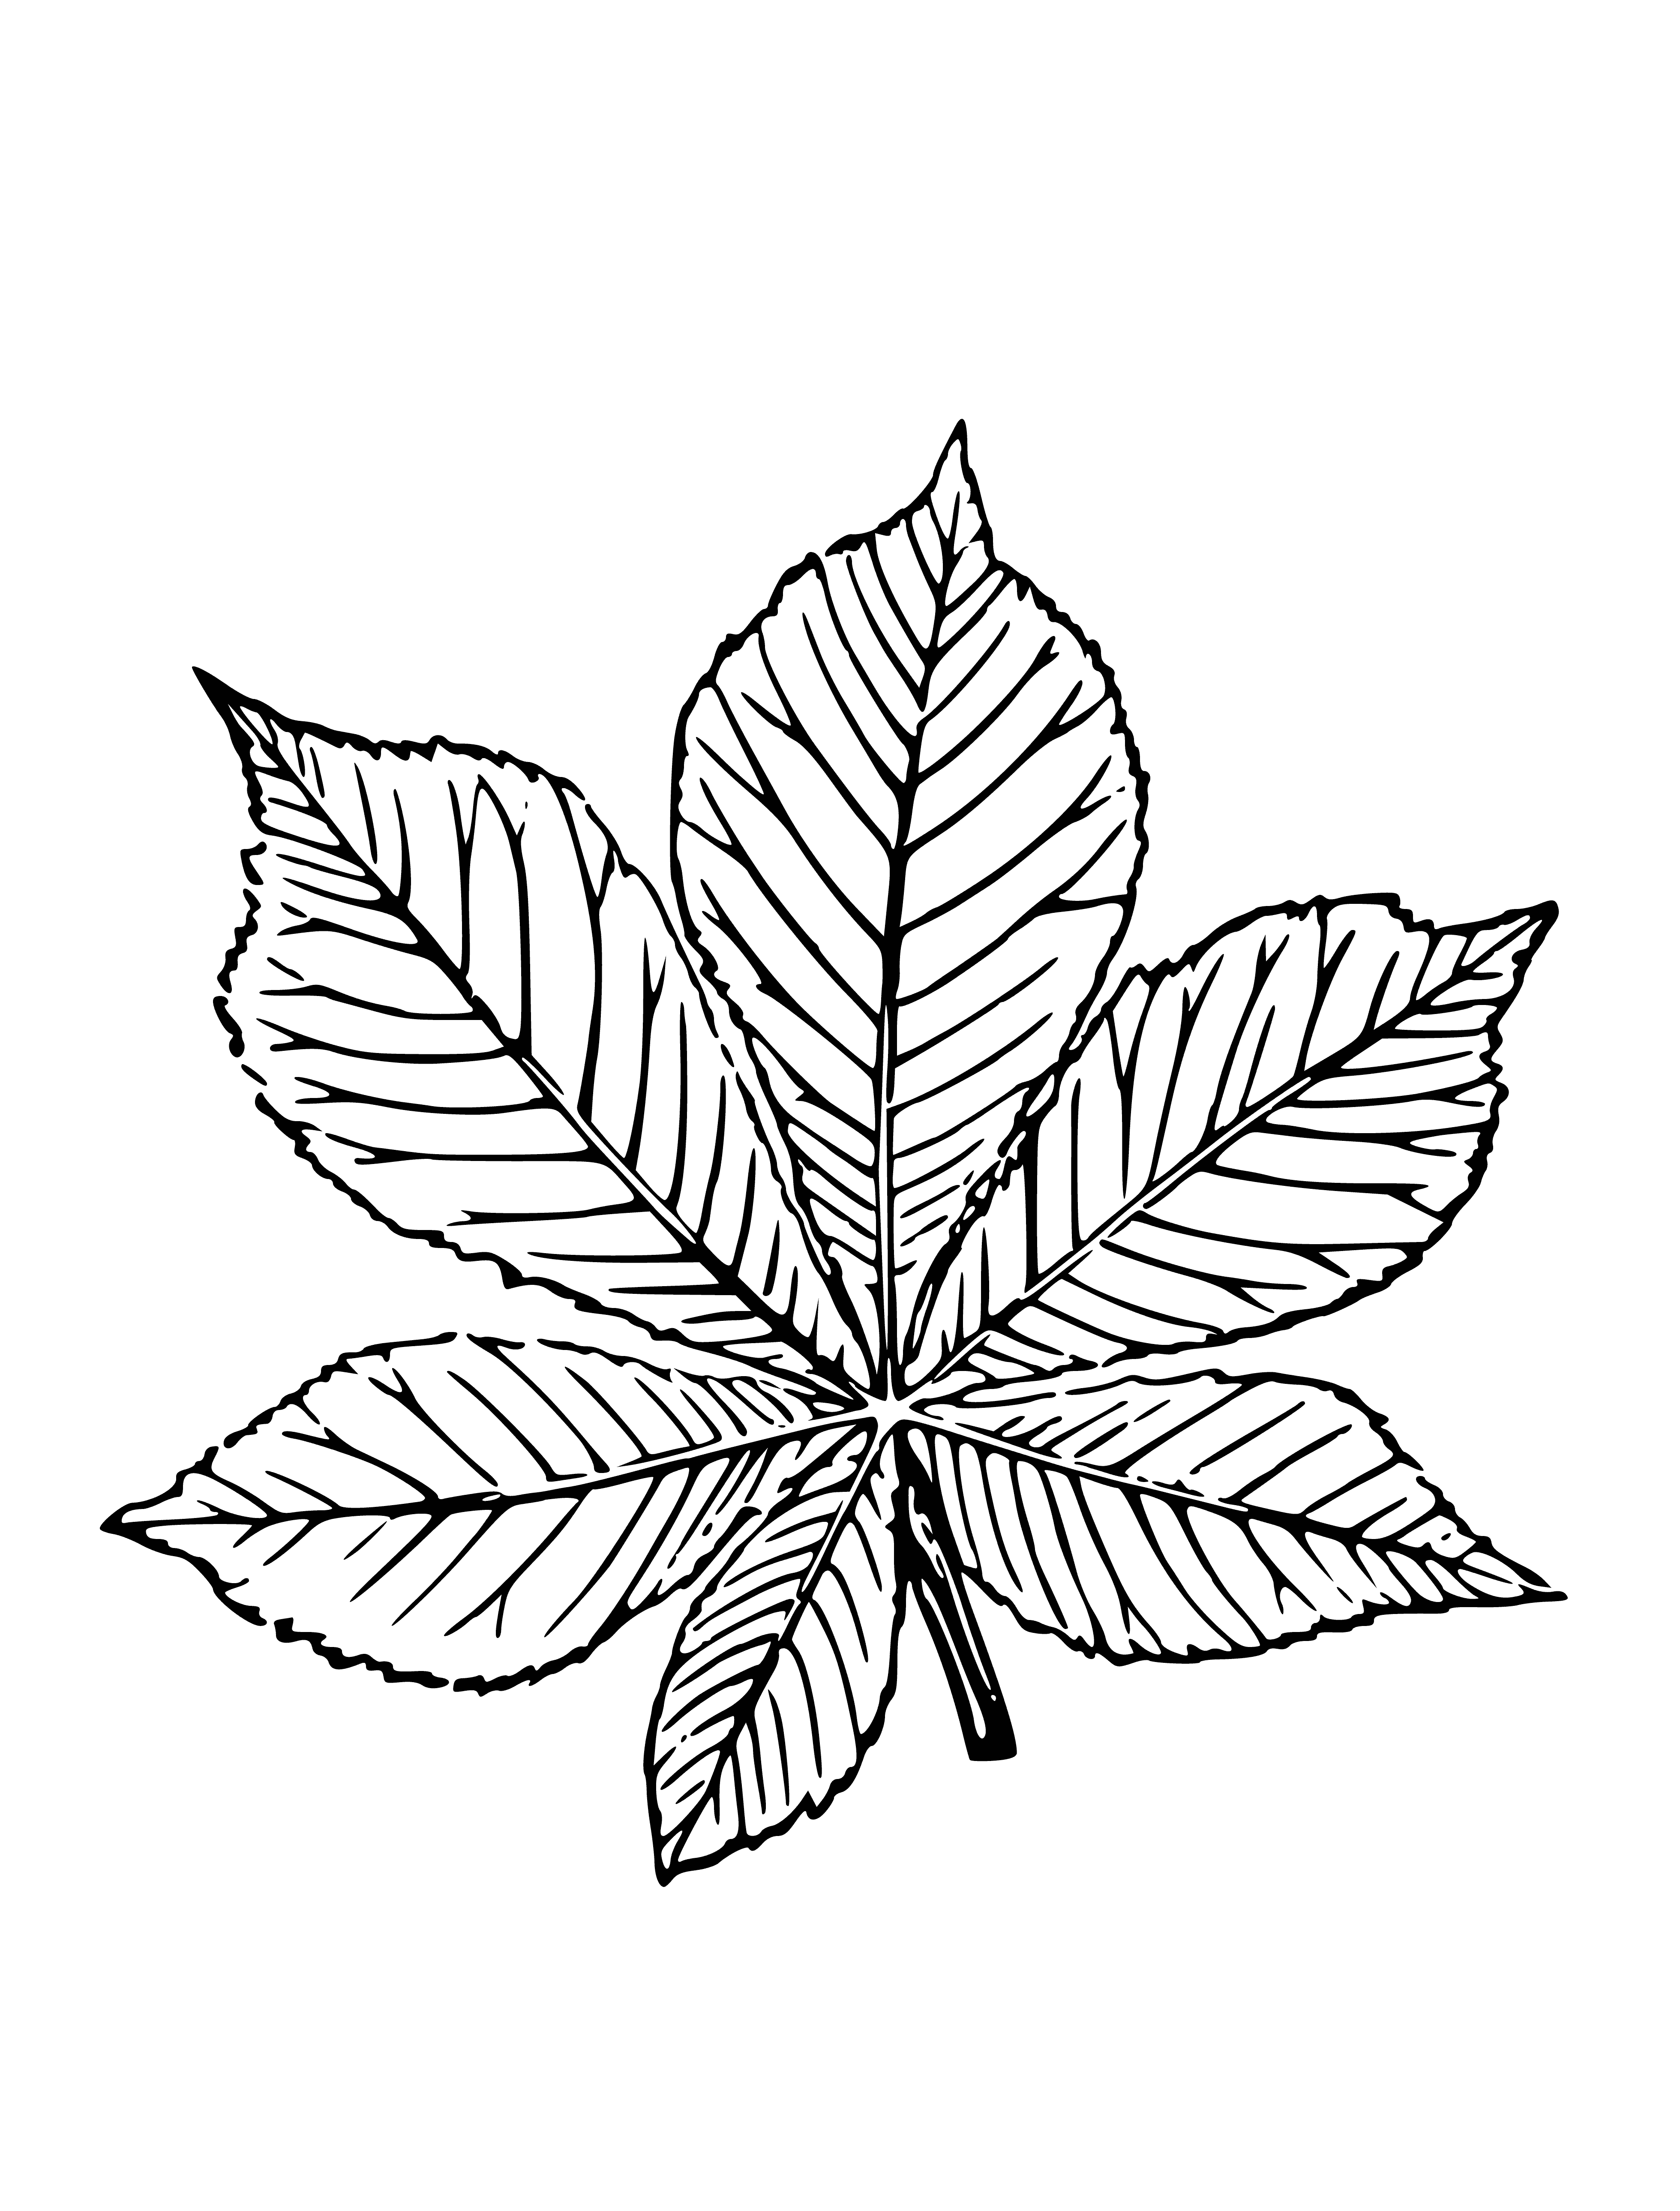 coloring page: Dark green chestnut leaf attached to twig, veins visible; no flowers or fruits.